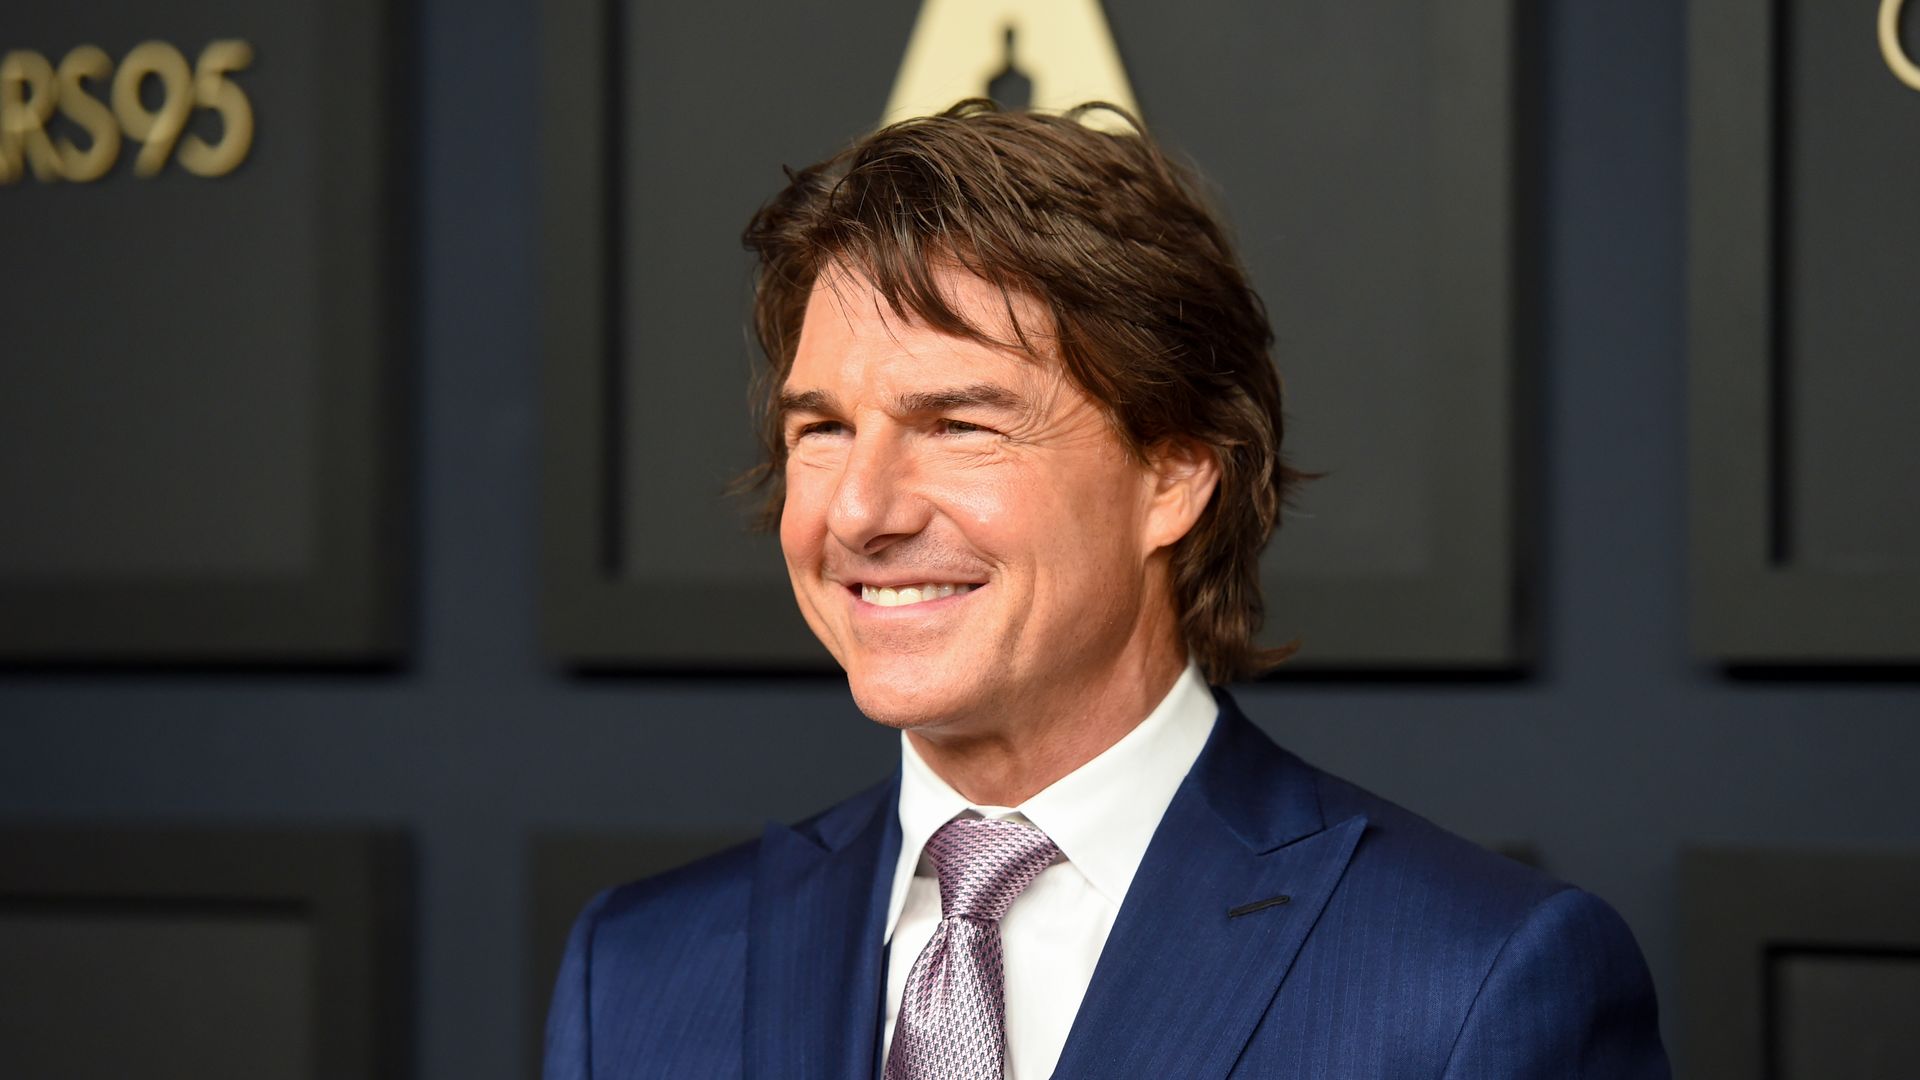 Tom Cruise at the 95th Oscars Nominees Luncheon held at The Beverly Hilton on February 13, 2023 in Beverly Hills, California